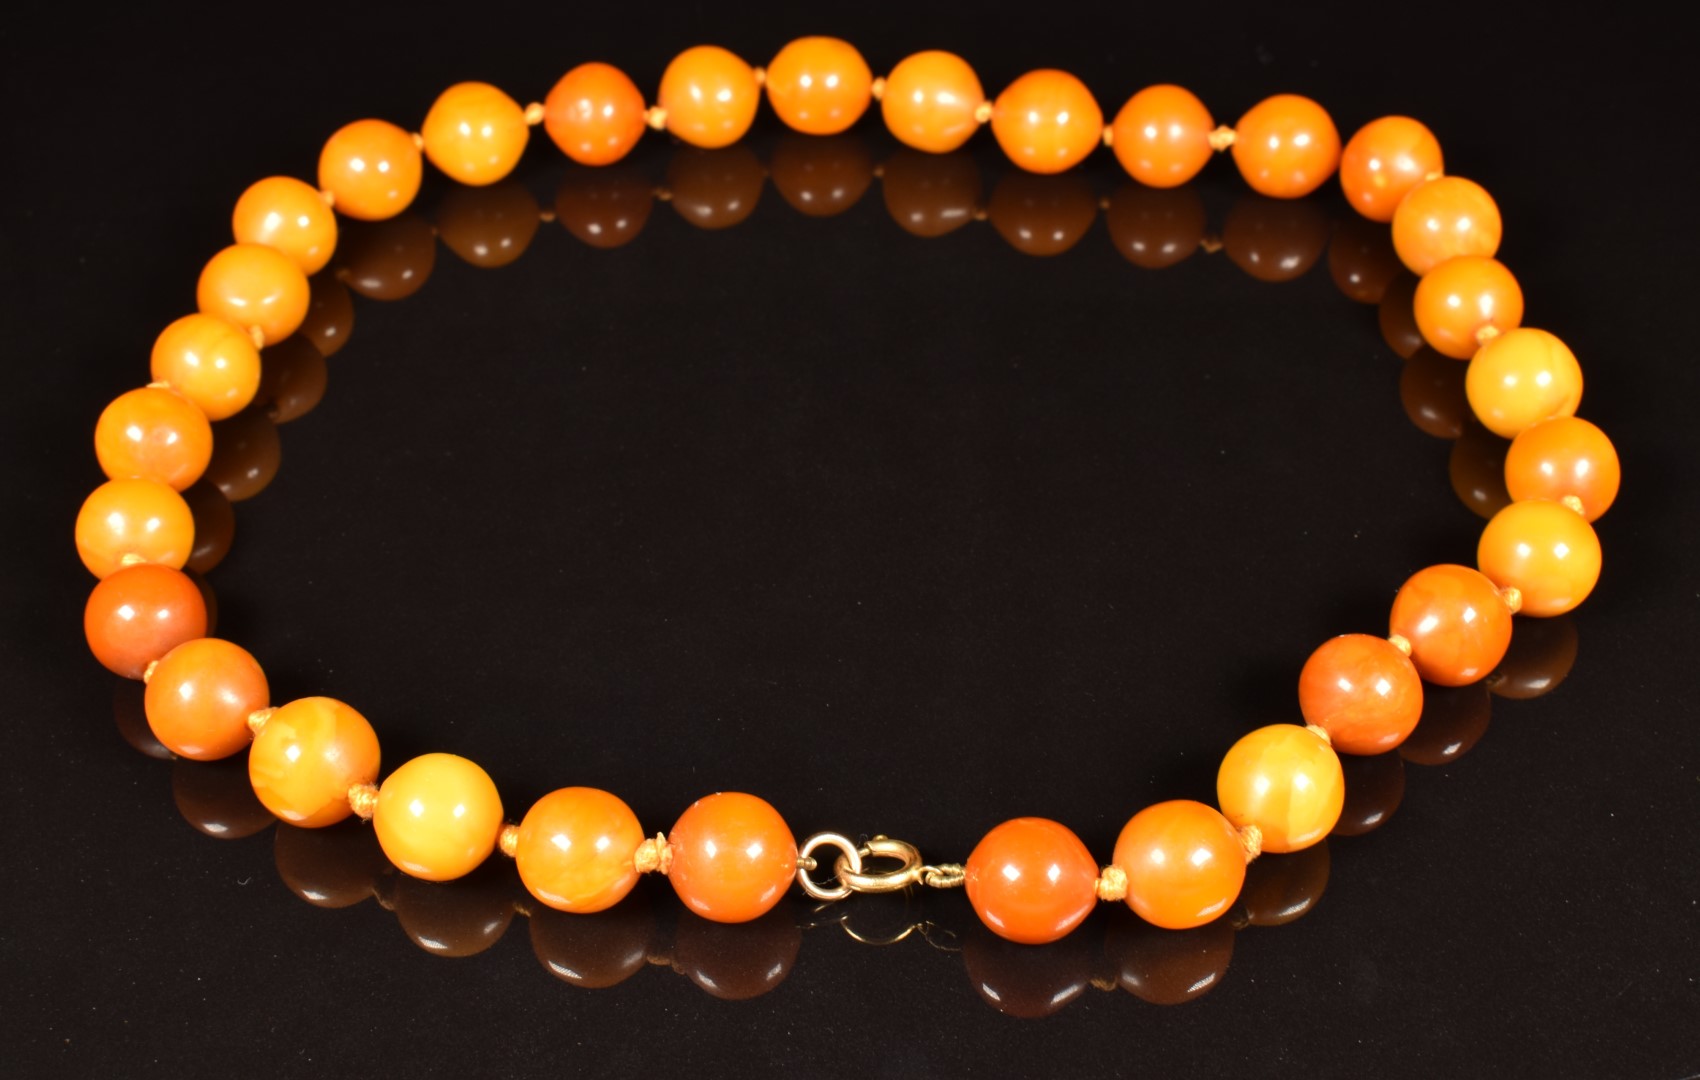 Baltic amber necklace made up of 31 beads, each approximately 15mm, 44g - Image 2 of 2